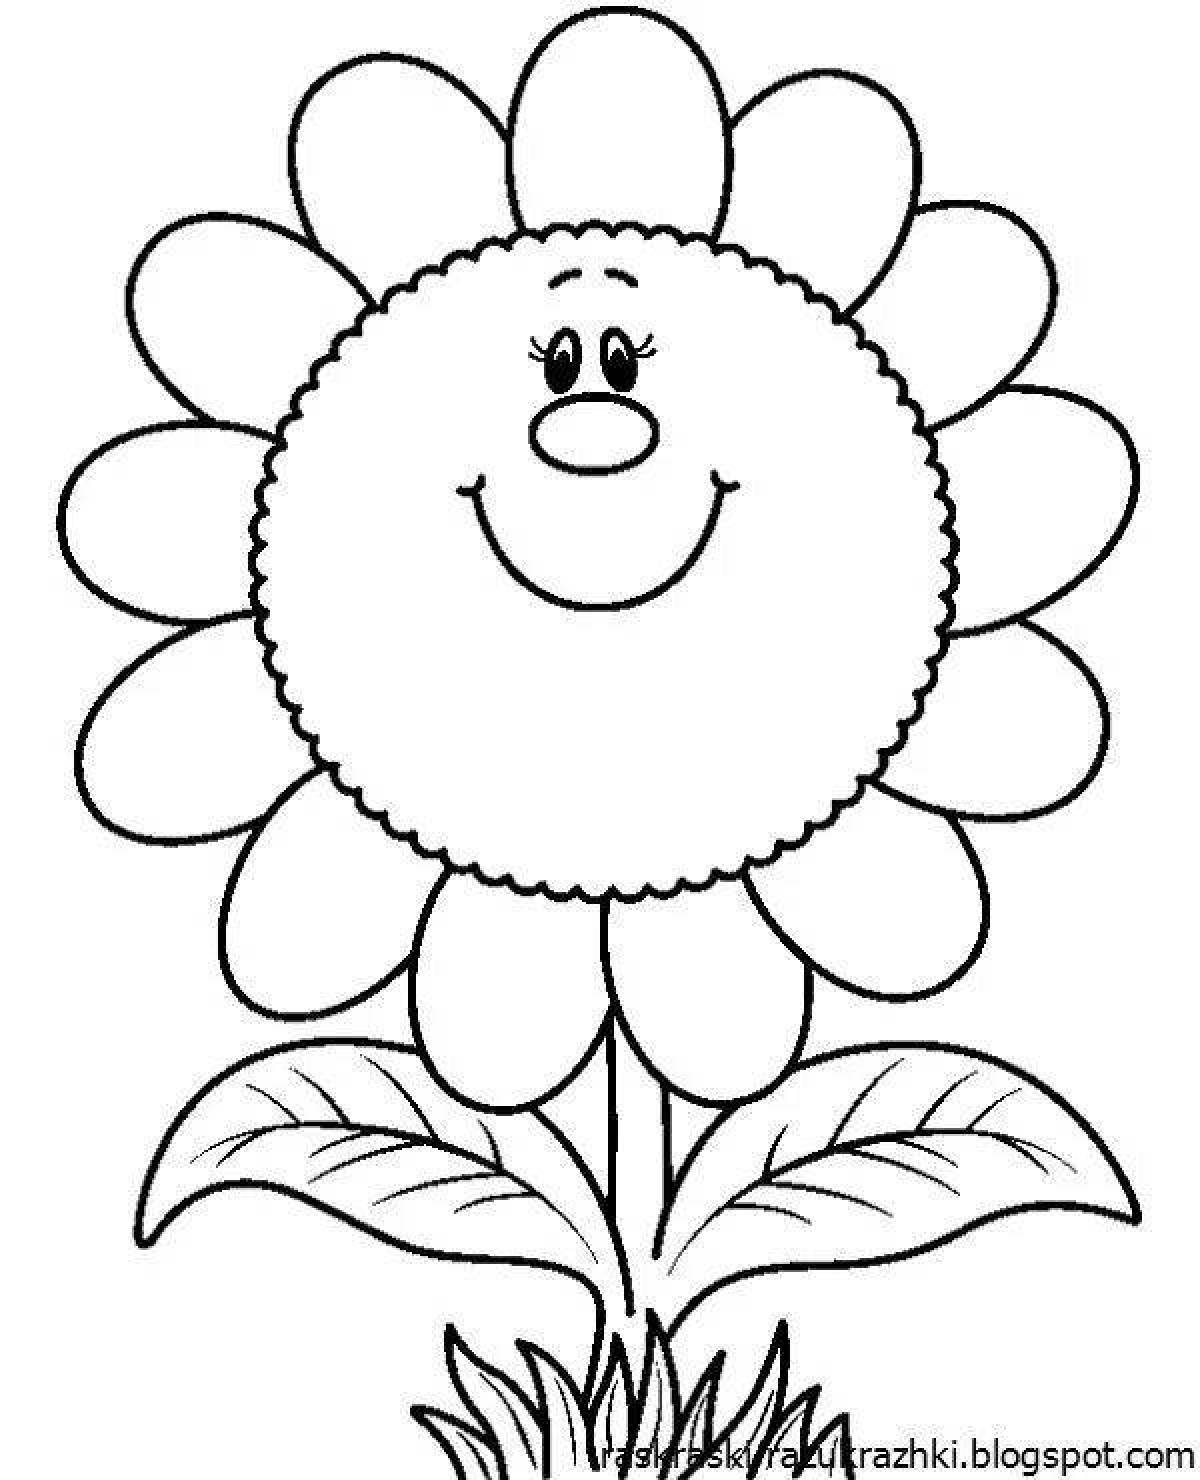 Delightful coloring book for children 2-3 years old with flowers